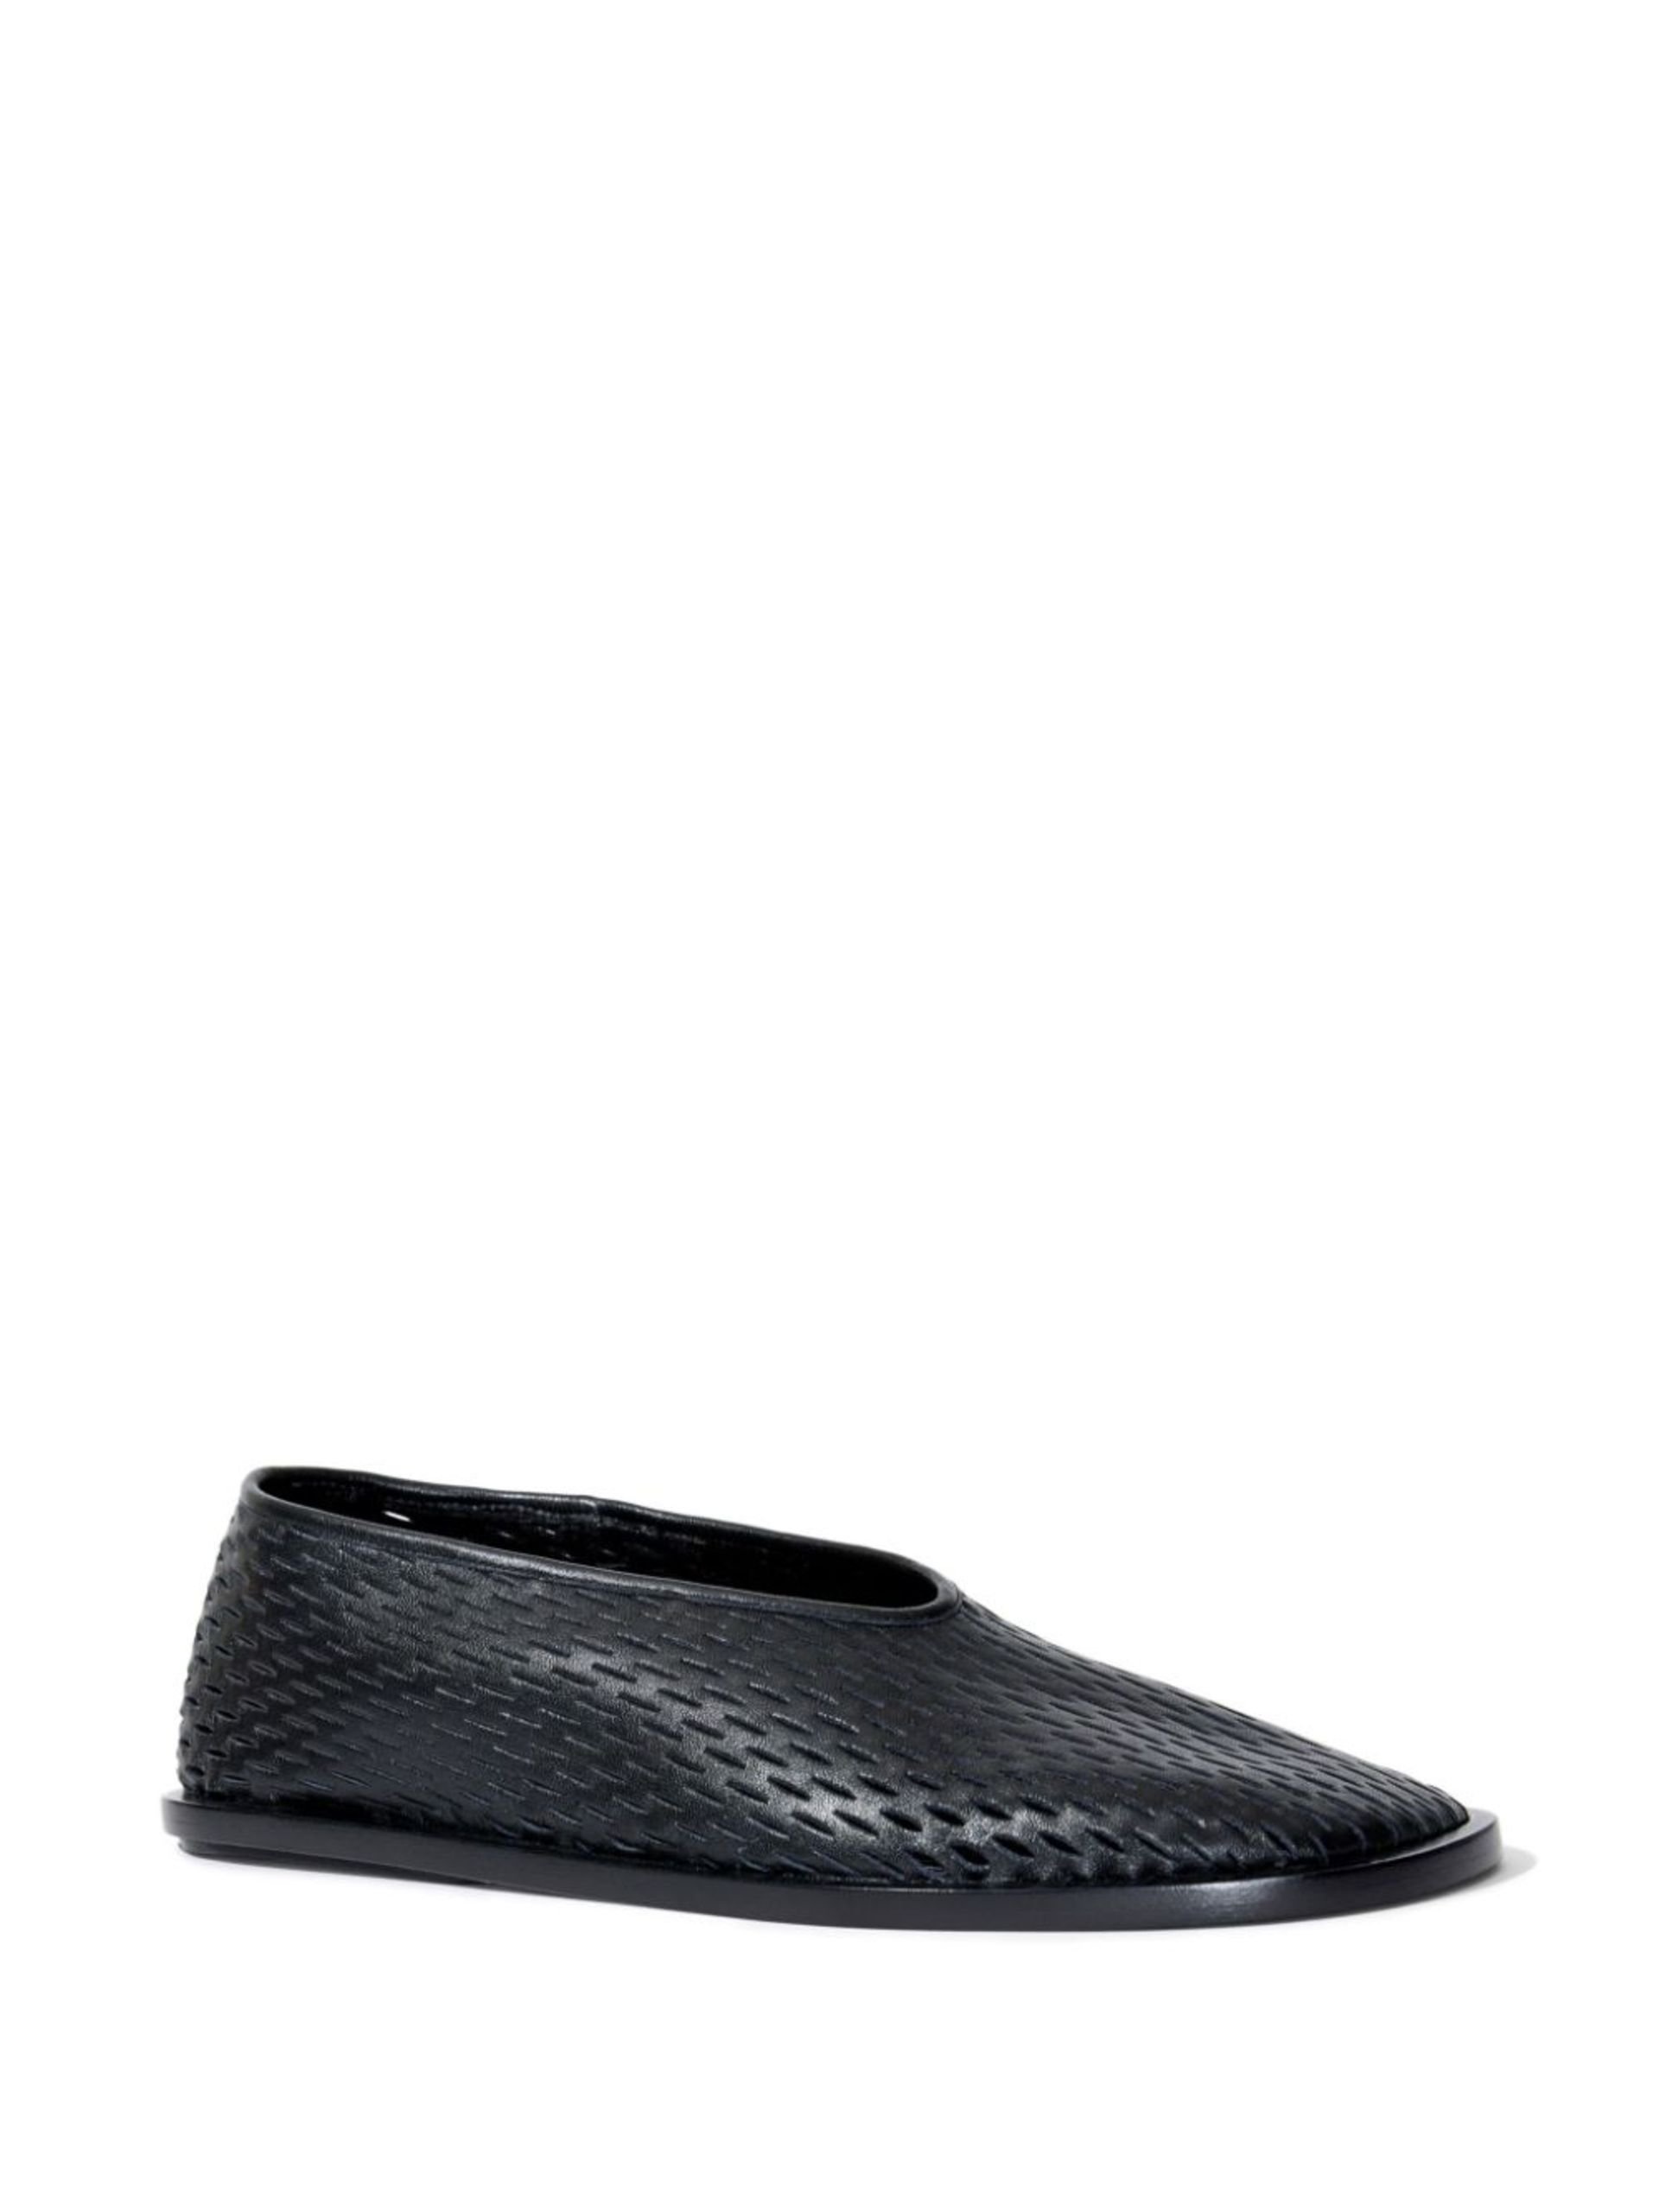 Black Perforated Leather Slippers - 2